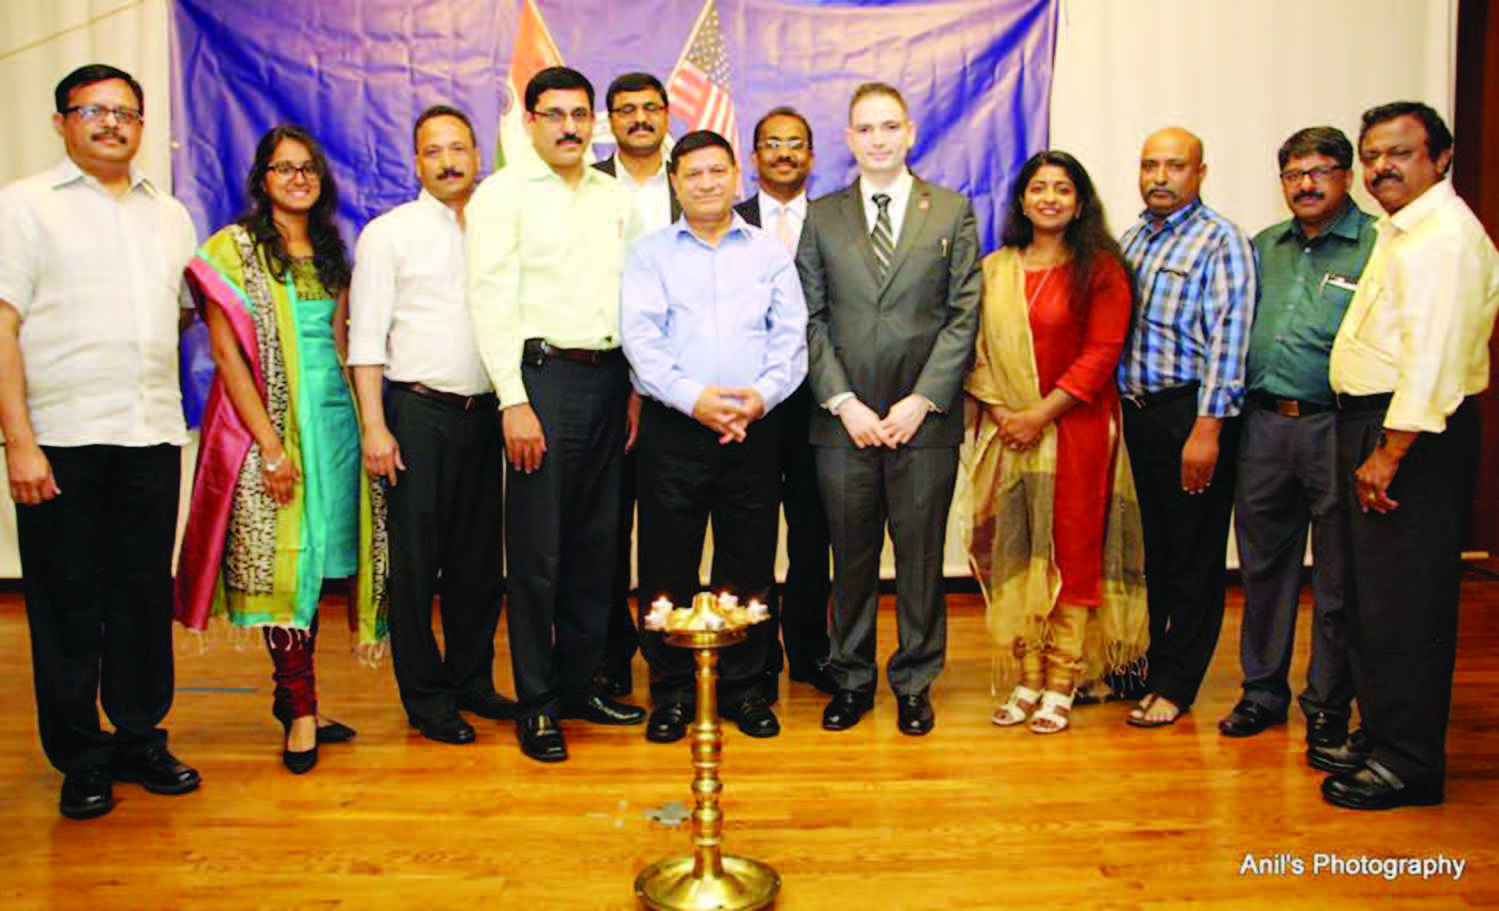 Chief Guest Dilip Chauhan, Director of Southeast/Asia n Affairs for Nassau County Comptroller (5th from right) with IAPC officers. Chairman of IAPC Ginsmon Zacharia is seen 4th from left and IAPC President Parveen Chopra, 5th from left.